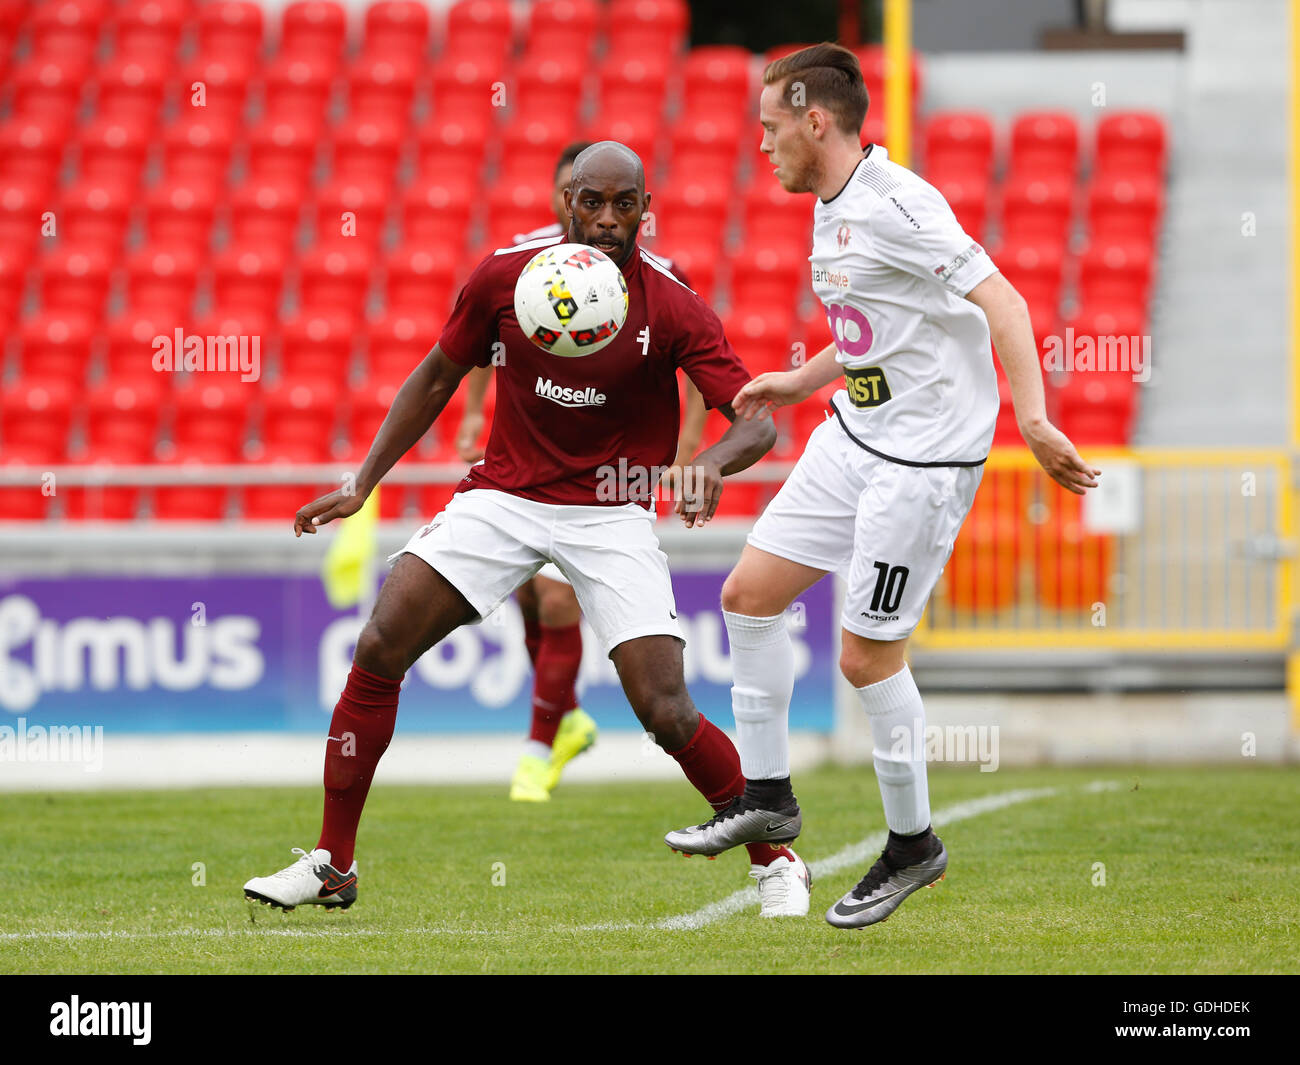 Seraing, Belgium. 16 Jul, 2016.RFC Seraing's  Brandon DEVILLE (#10) and FC Metz's   RIVIEREZ (#3) compete for the ball  during a Friendly football game between RFC Seraing and FC Metz in Seraing, Belgium. Credit:  Frédéric de Laminne/Alamy Live News Stock Photo